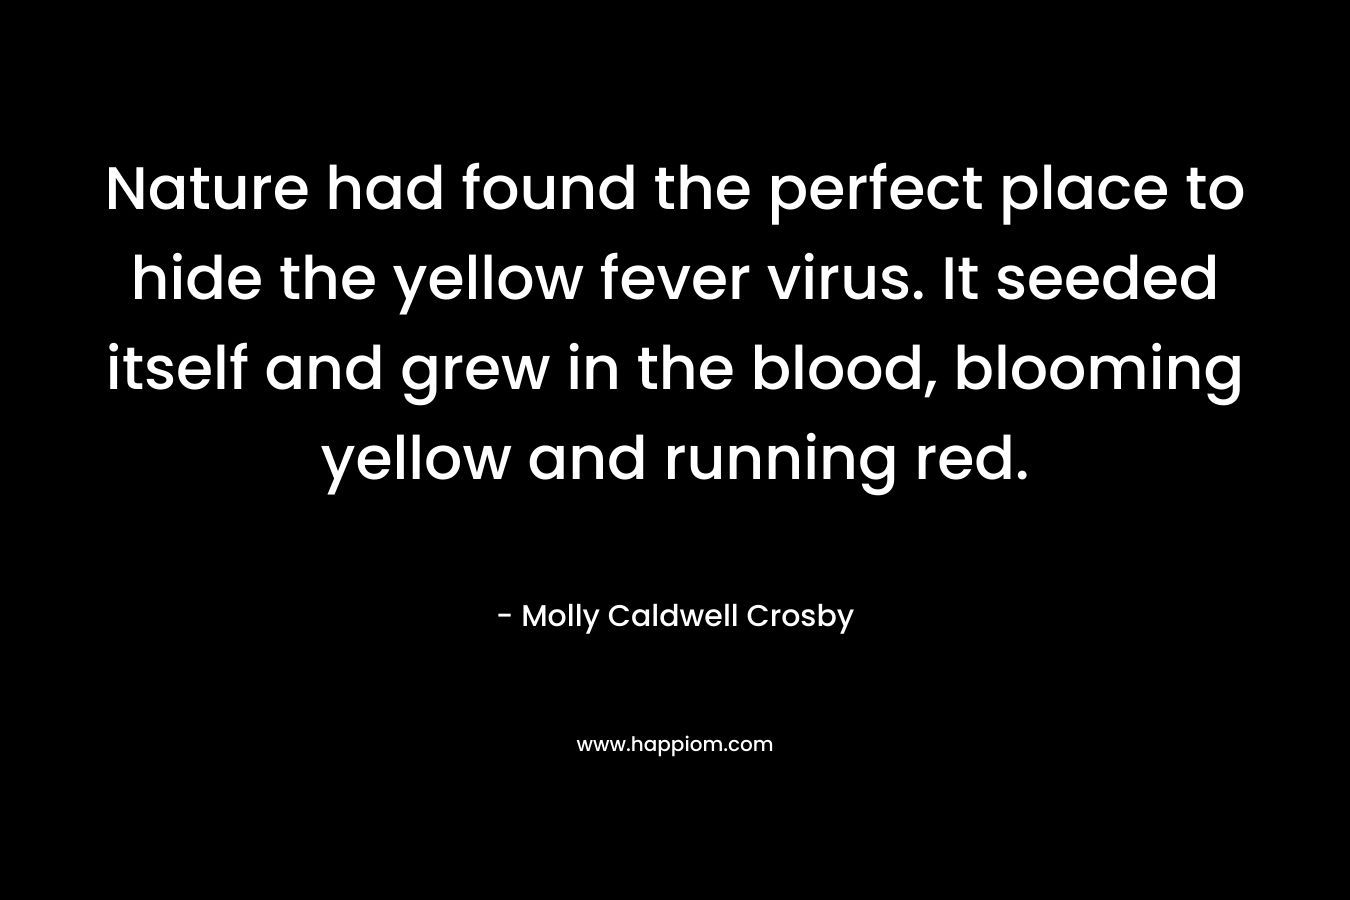 Nature had found the perfect place to hide the yellow fever virus. It seeded itself and grew in the blood, blooming yellow and running red. – Molly Caldwell Crosby